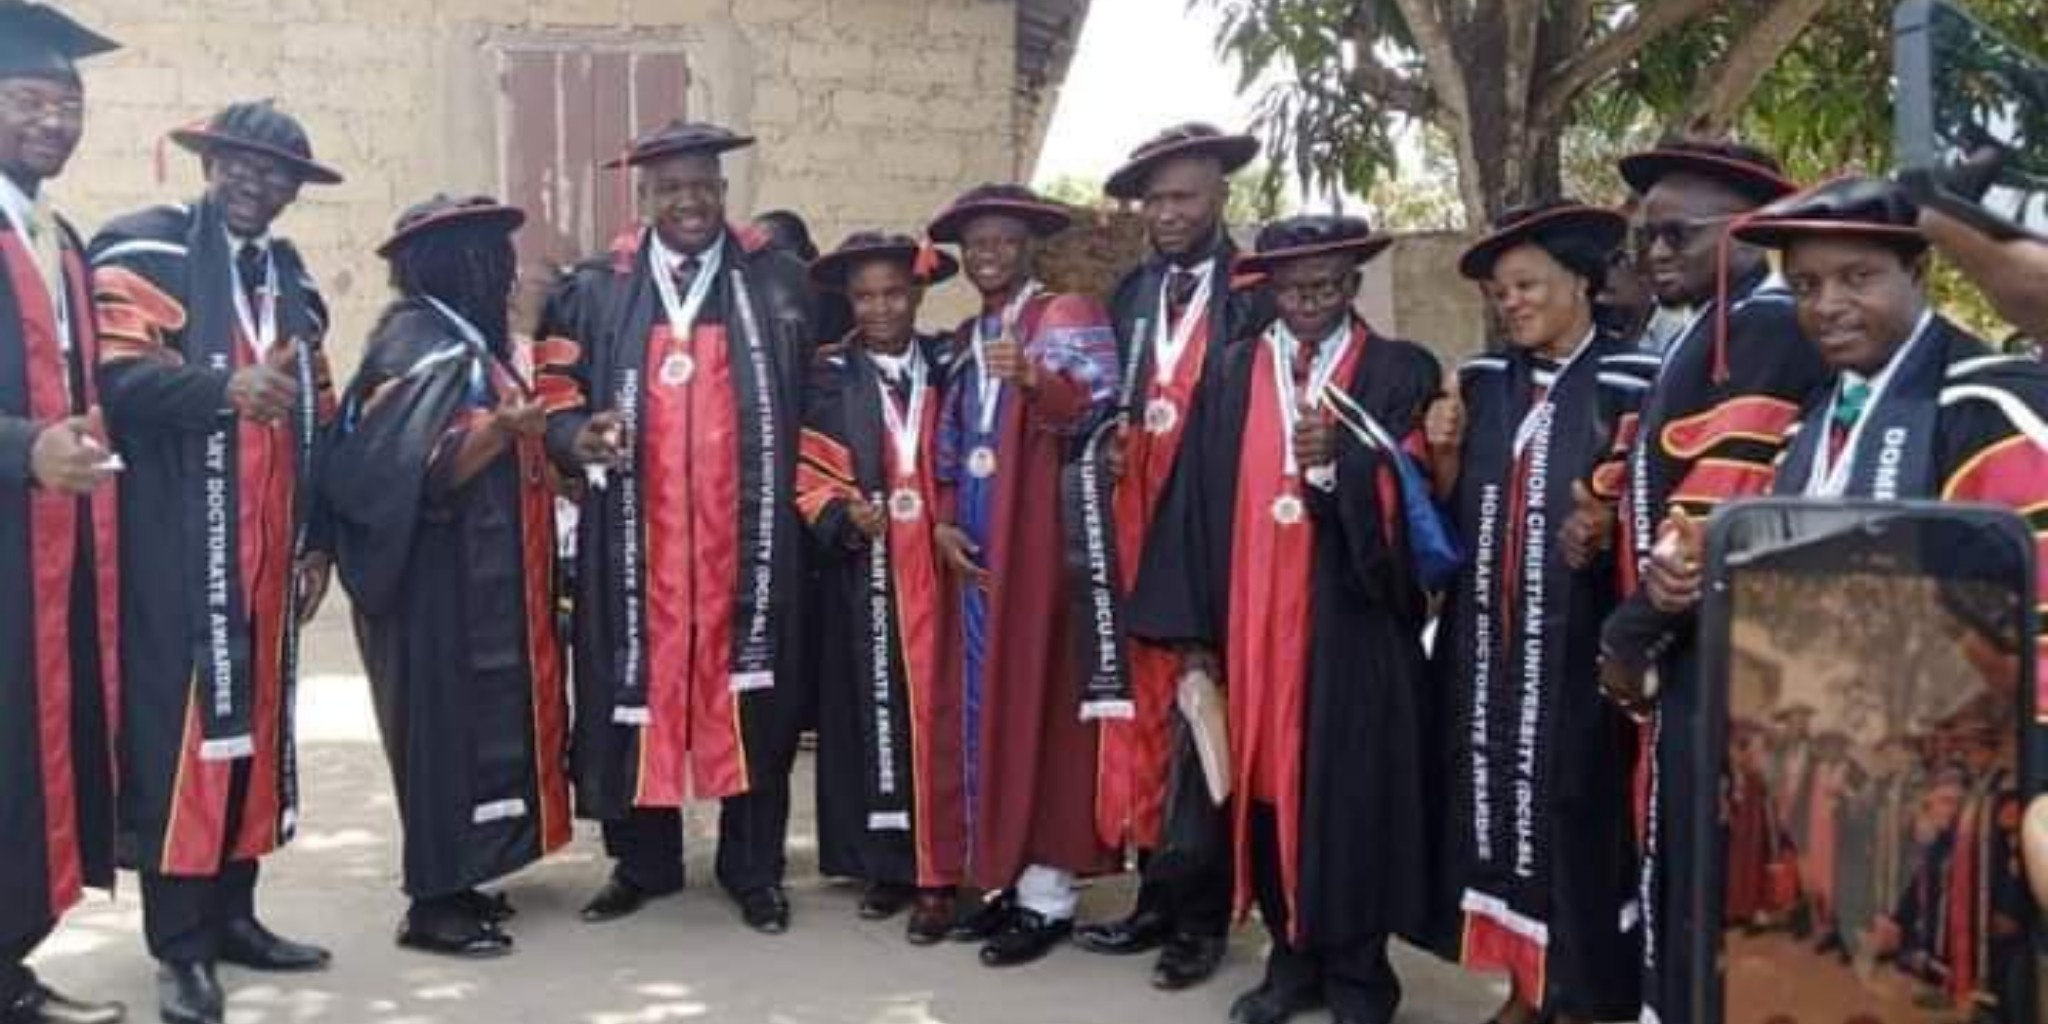 Chancellor of Alleged Fake University Arrested After Awarding Honorary Doctorate Degrees Under a Mango Tree